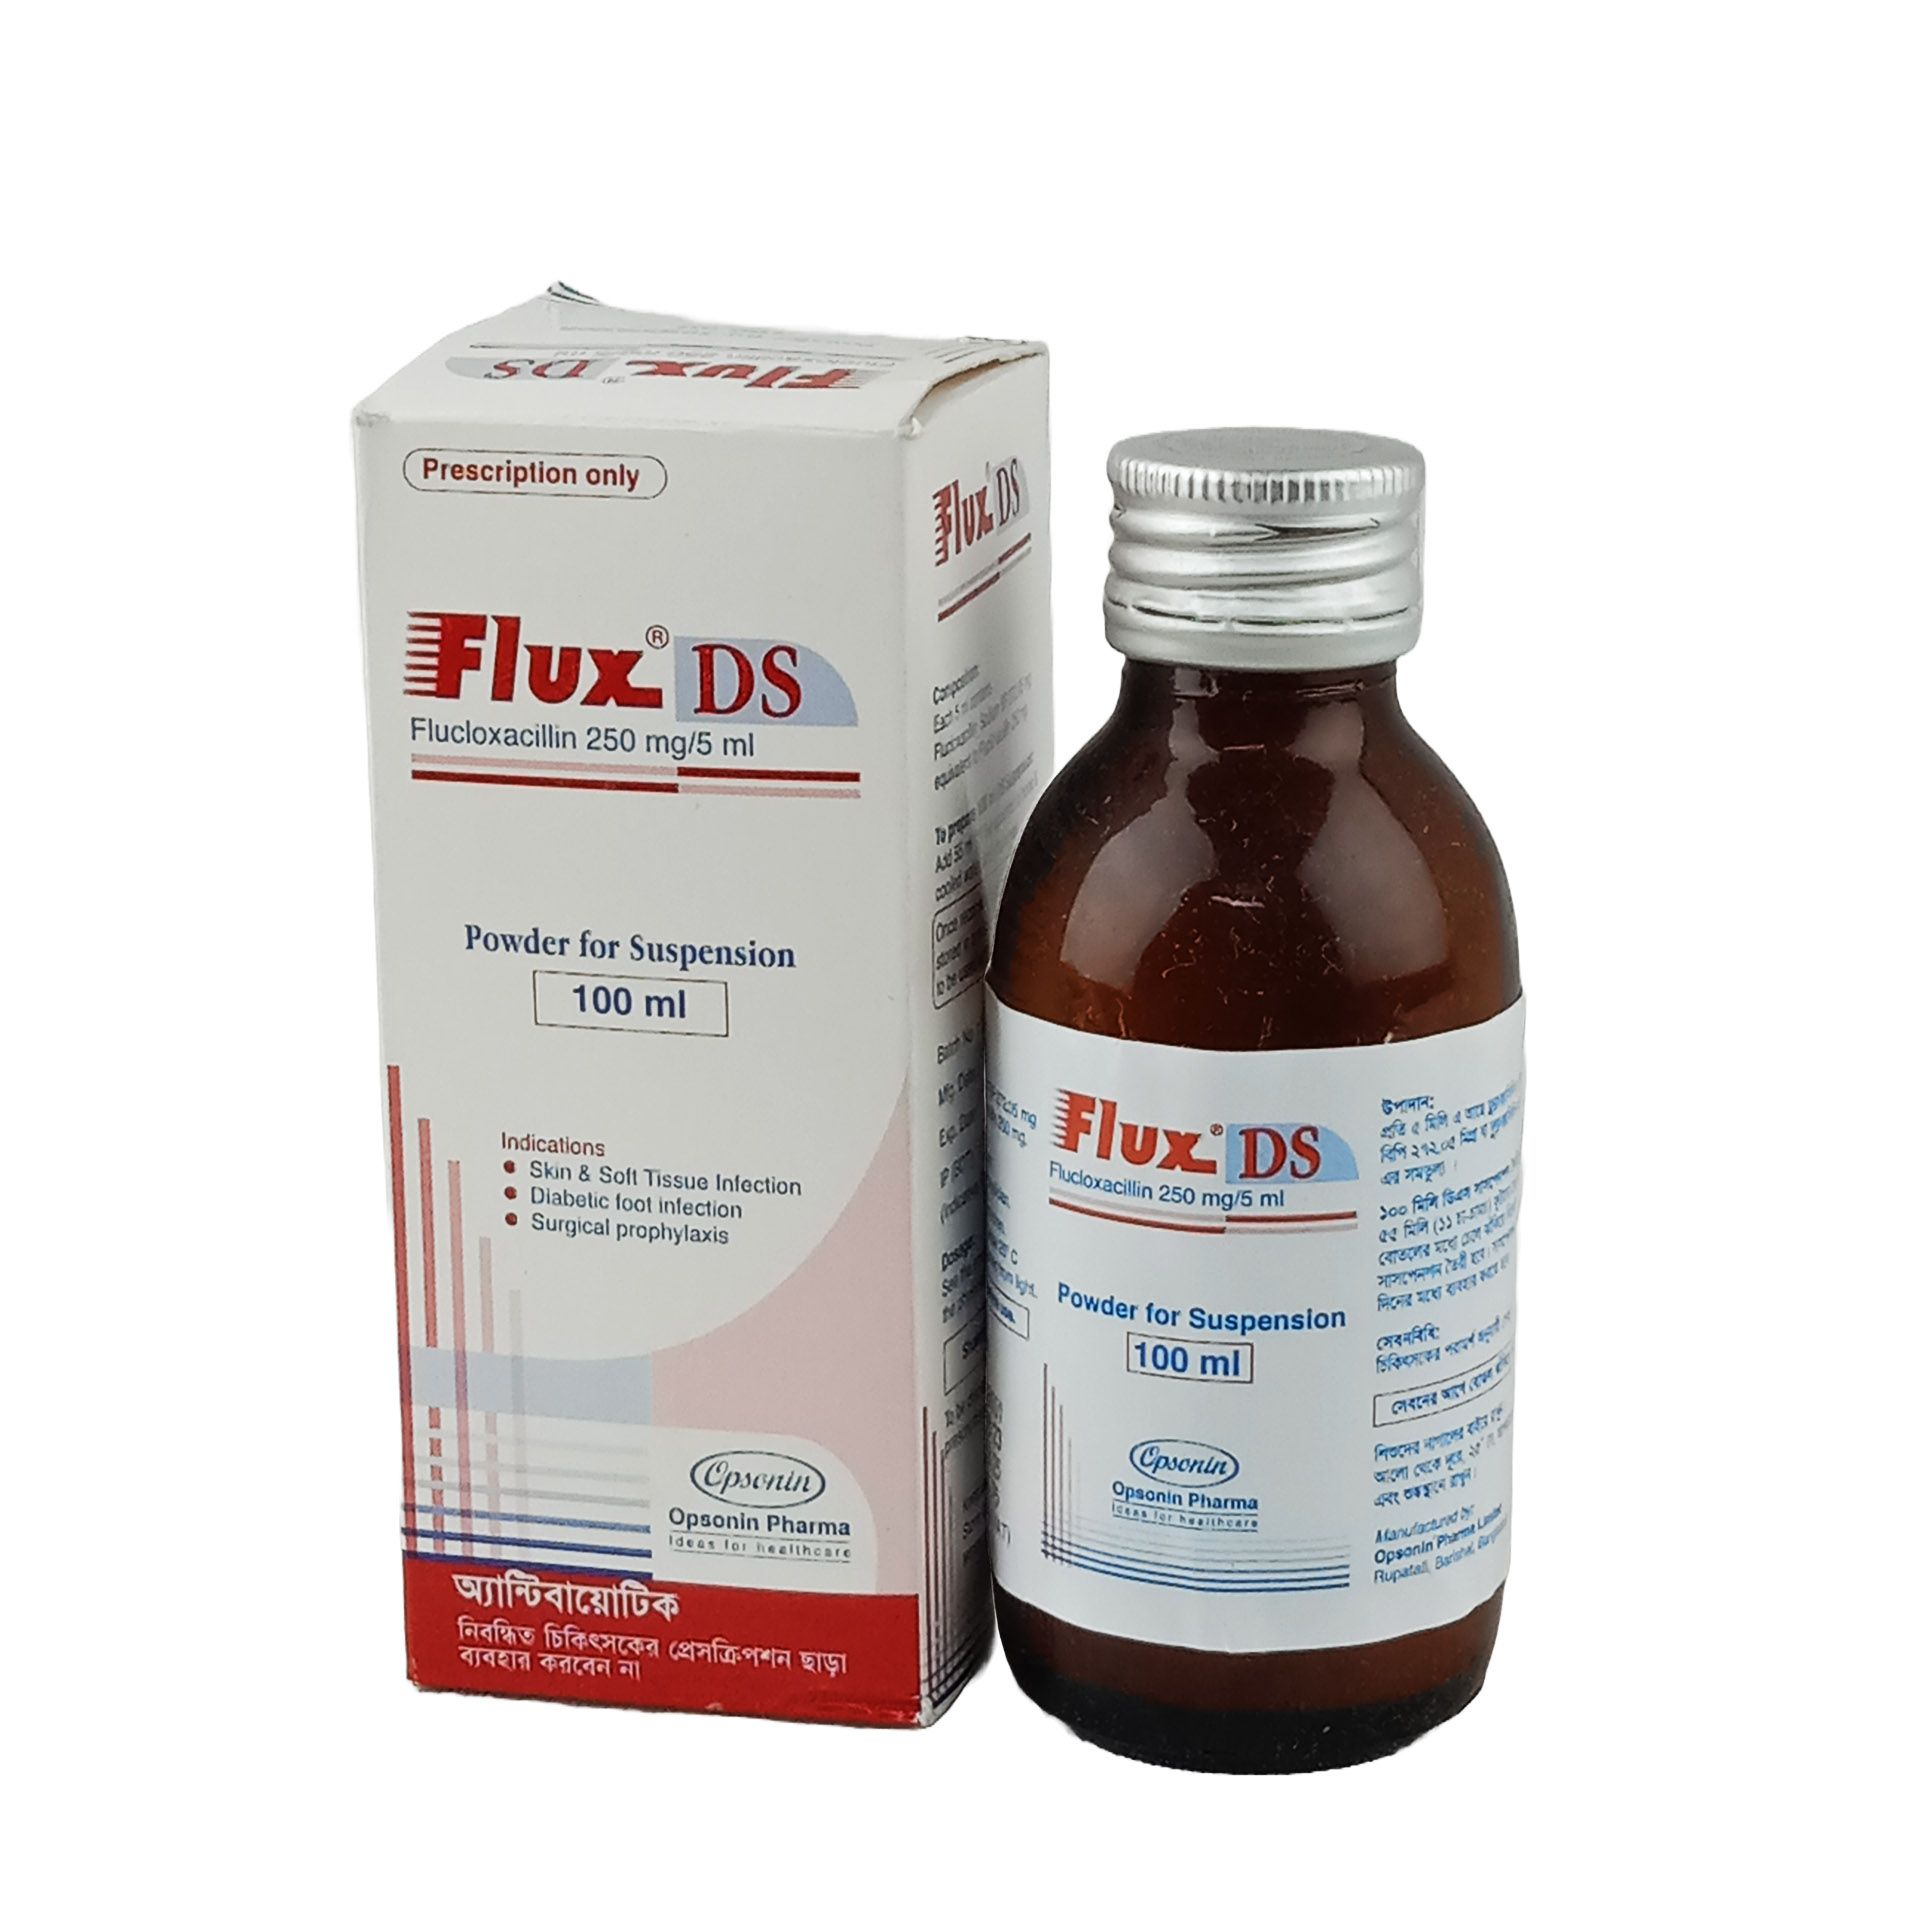 Flux DS 250mg/5ml Powder for Suspension